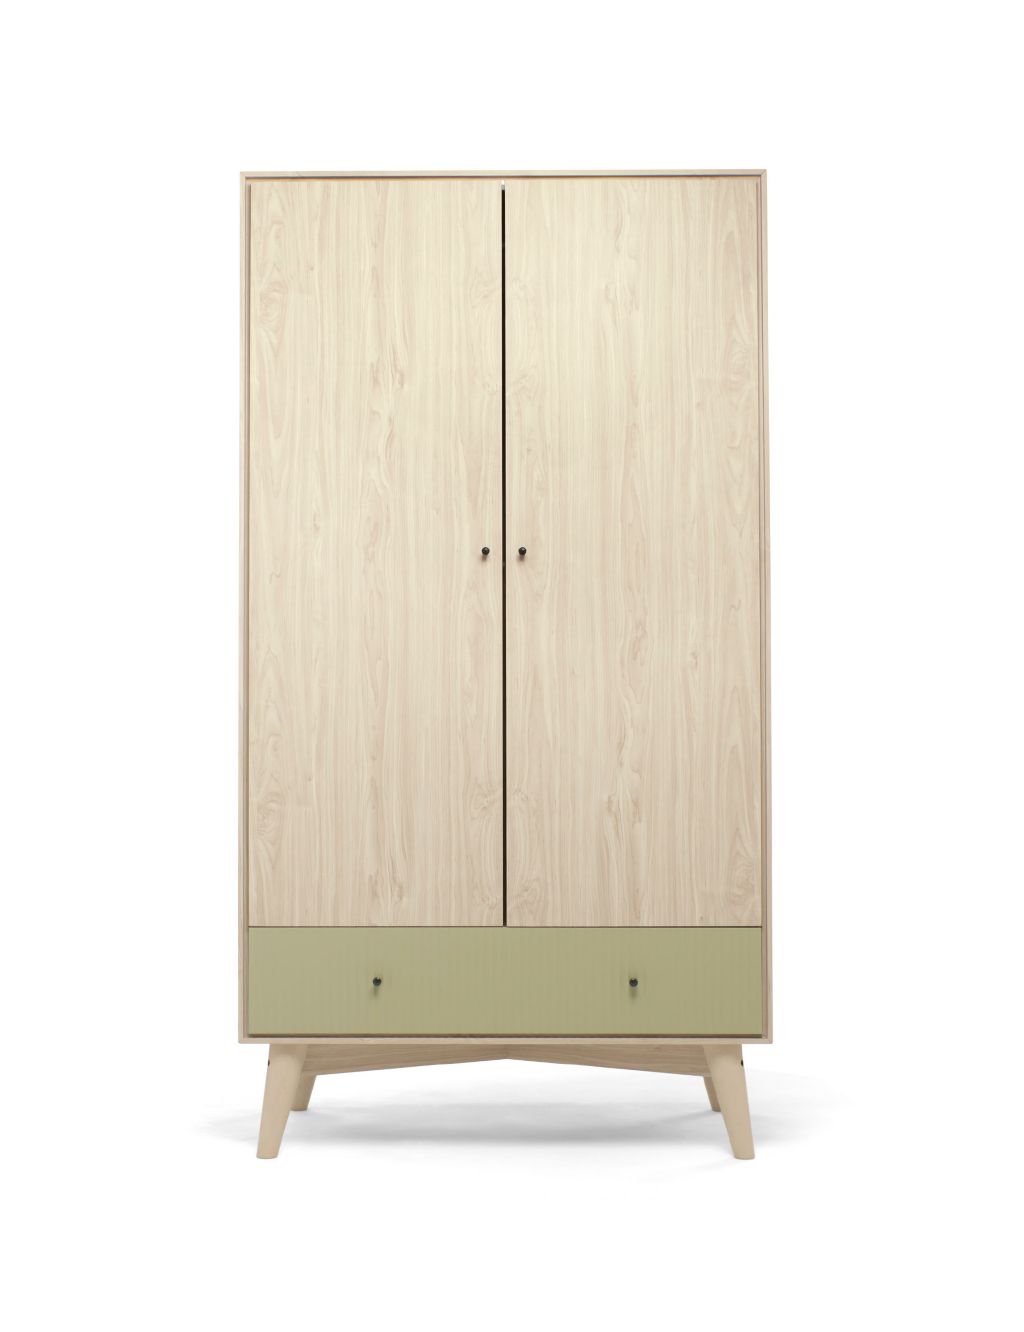 Coxley 3 Piece Cotbed Range with Dresser and Wardrobe image 4